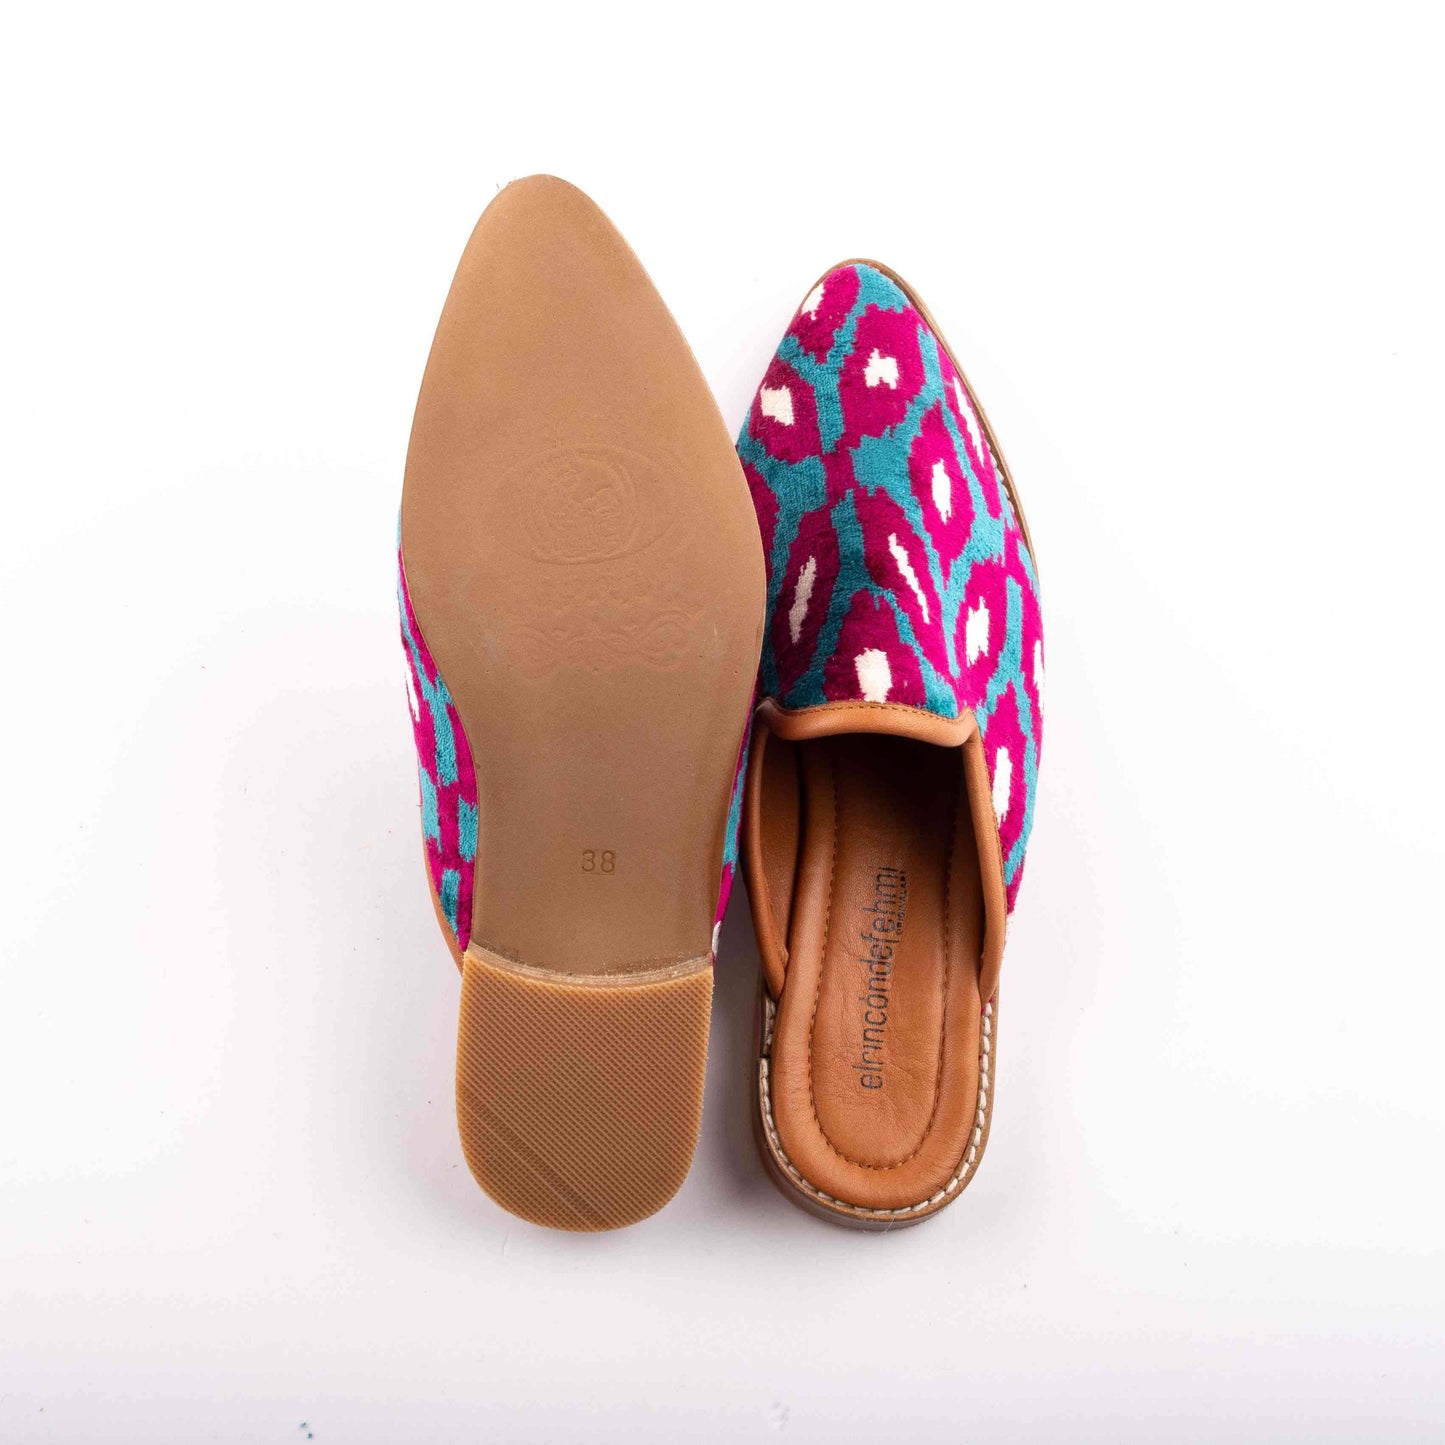 Ethnic Woman Pointed Toe Slipper Crafted From Handmade Velvet and Real Leather Size 6.5  Base Width: 8 cm - Base Length: 26.5 cm - Heel:1.5 cm